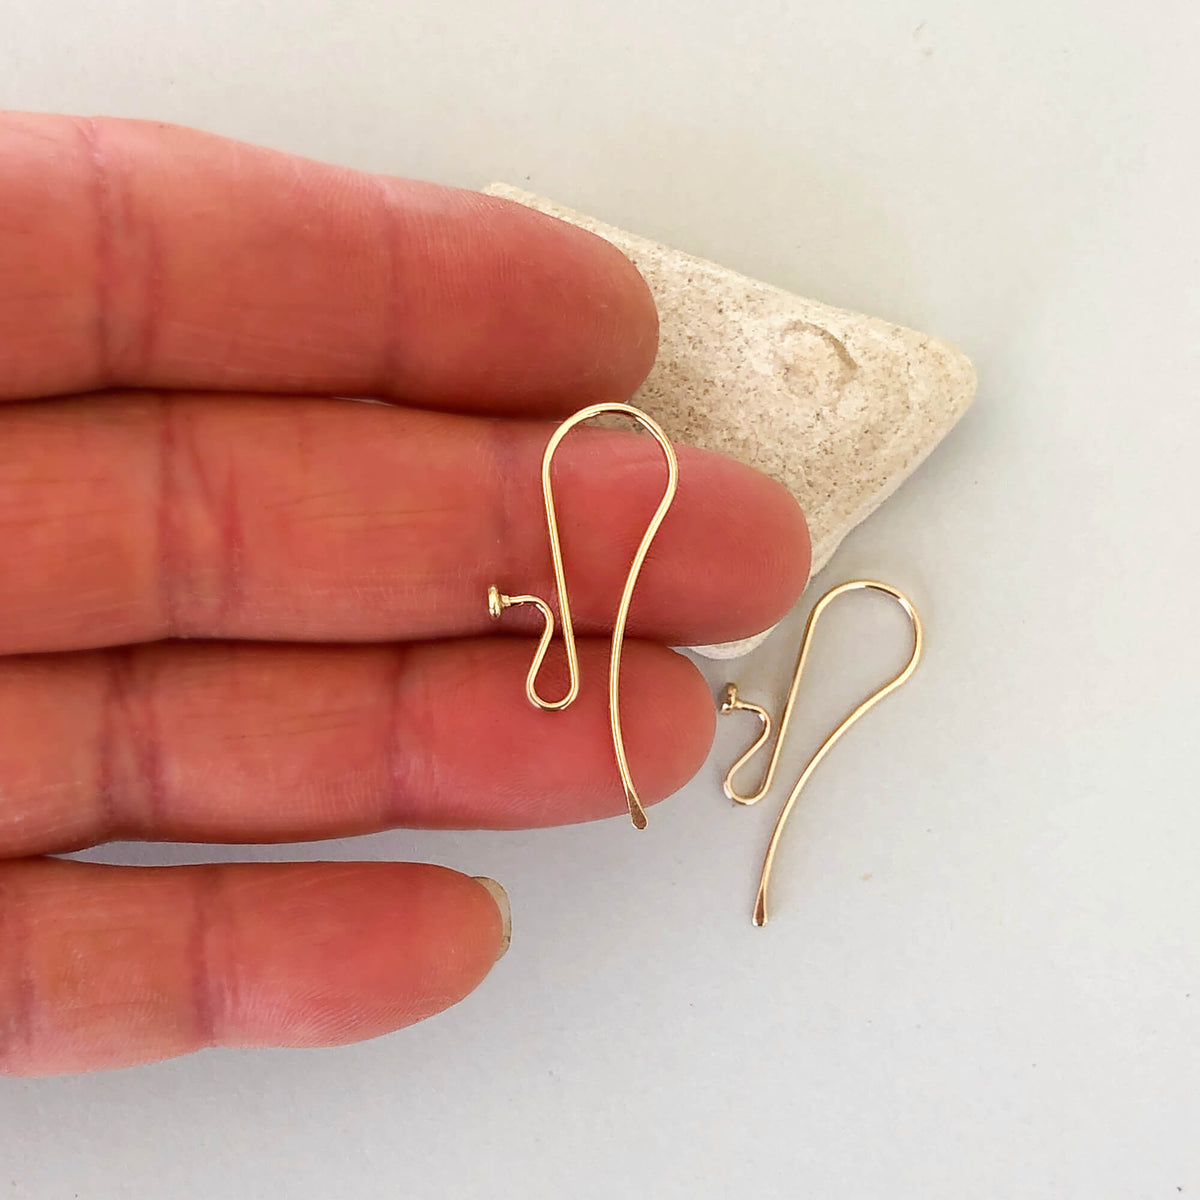 14K Gold Filled French Wire Earring Hooks (10)